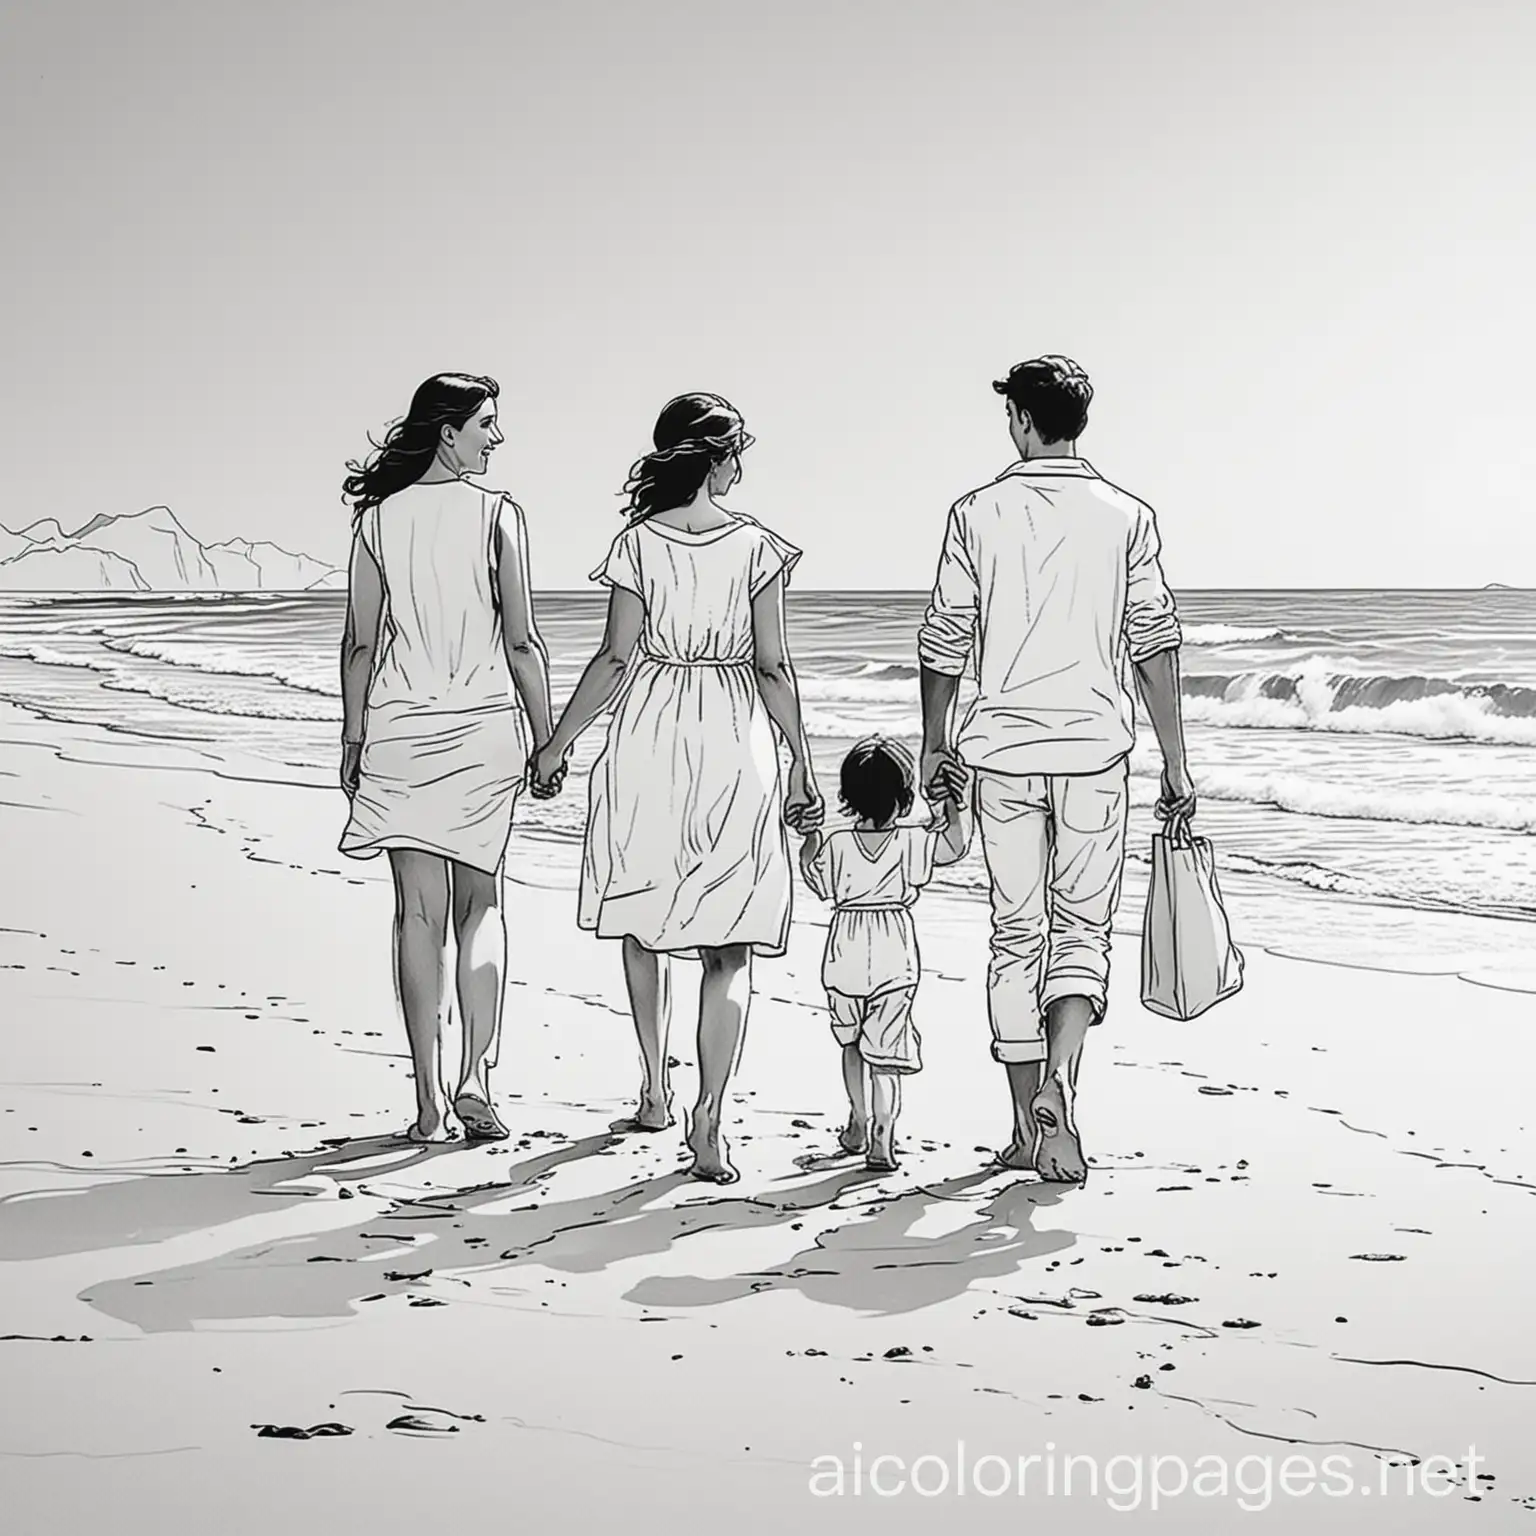 Family-Beach-Stroll-Coloring-Page-Simple-Black-and-White-Illustration